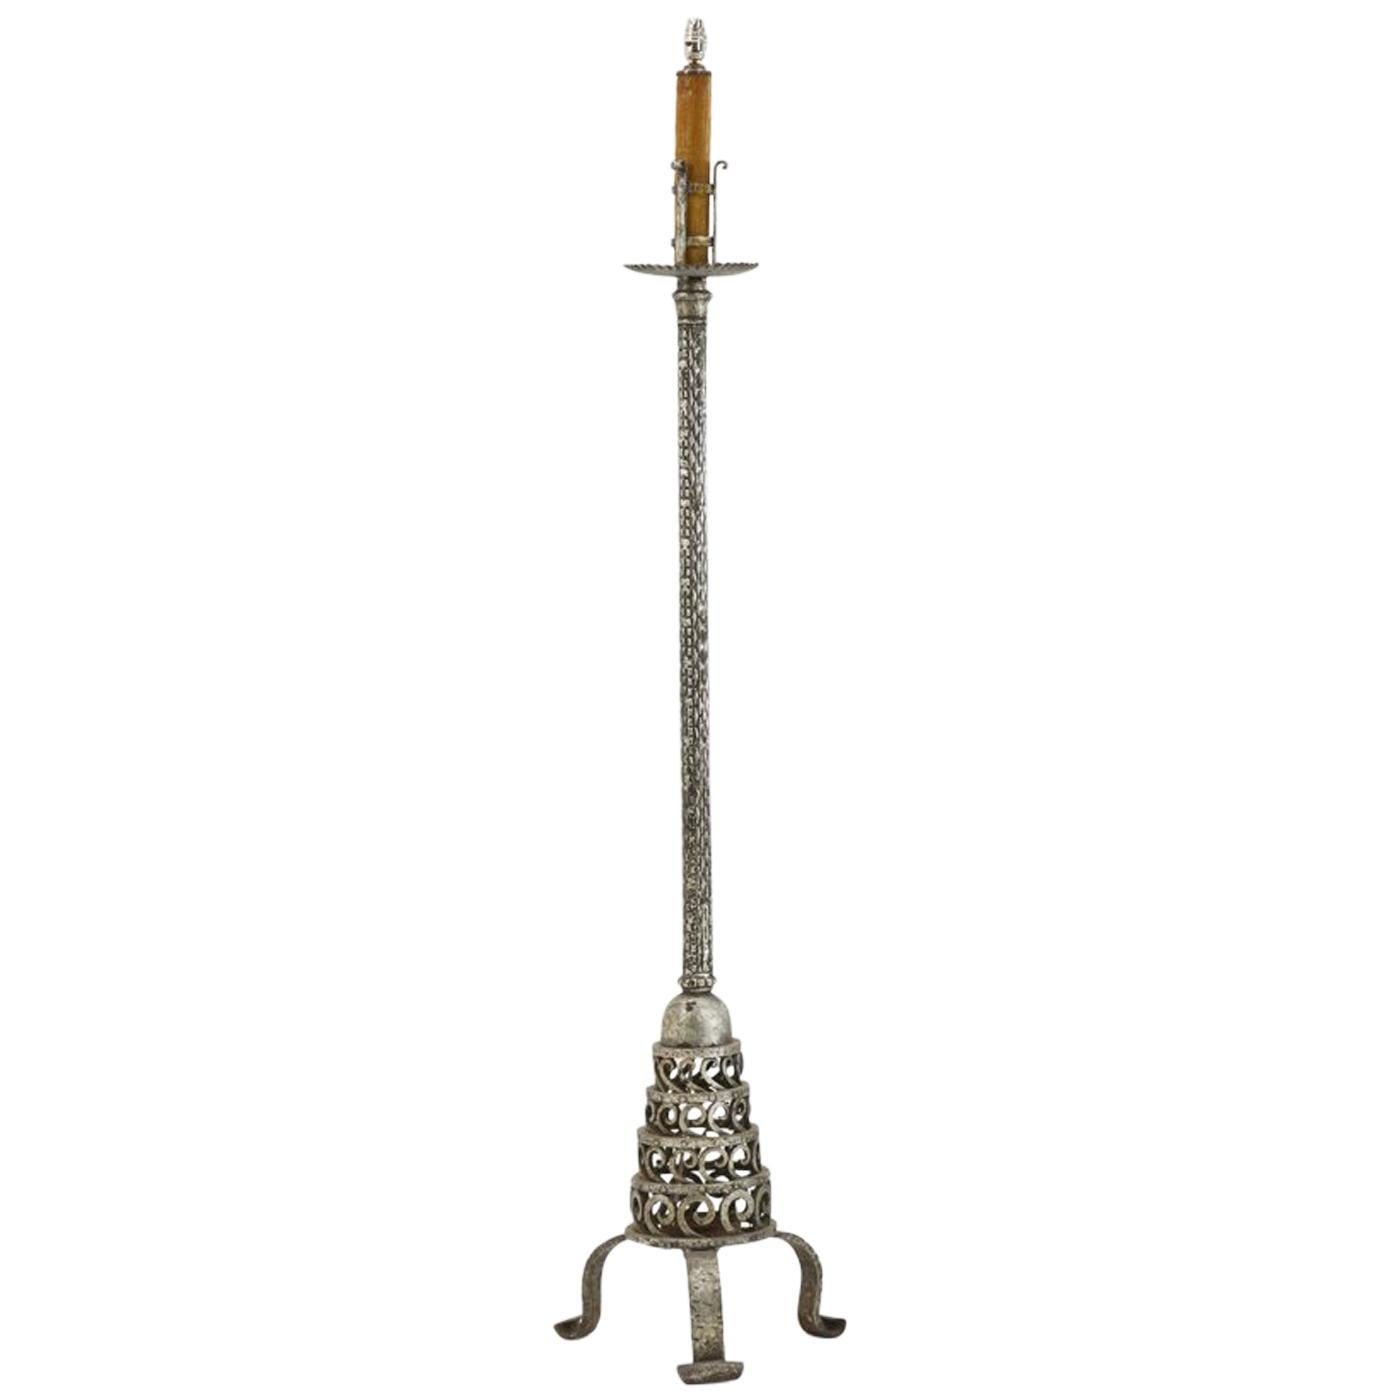 1960s Spanish Silvered Wrought Iron Floor Lamp For Sale